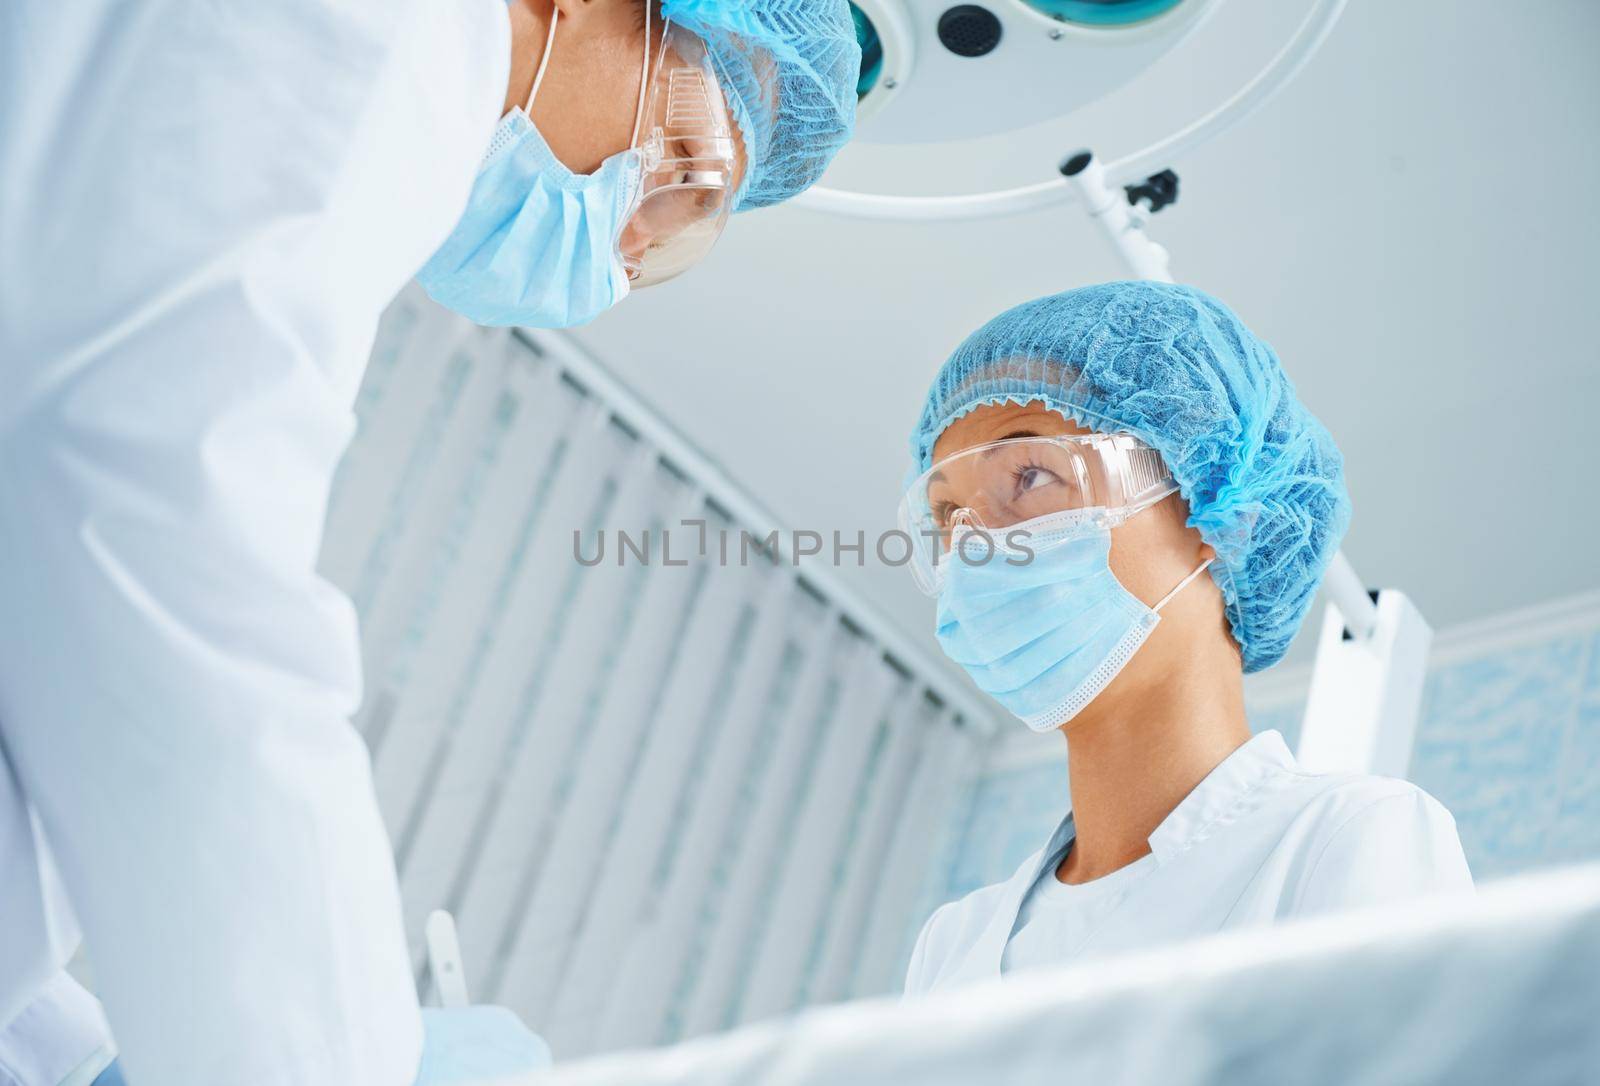 Surgeon and assistant in operating room by alexAleksei